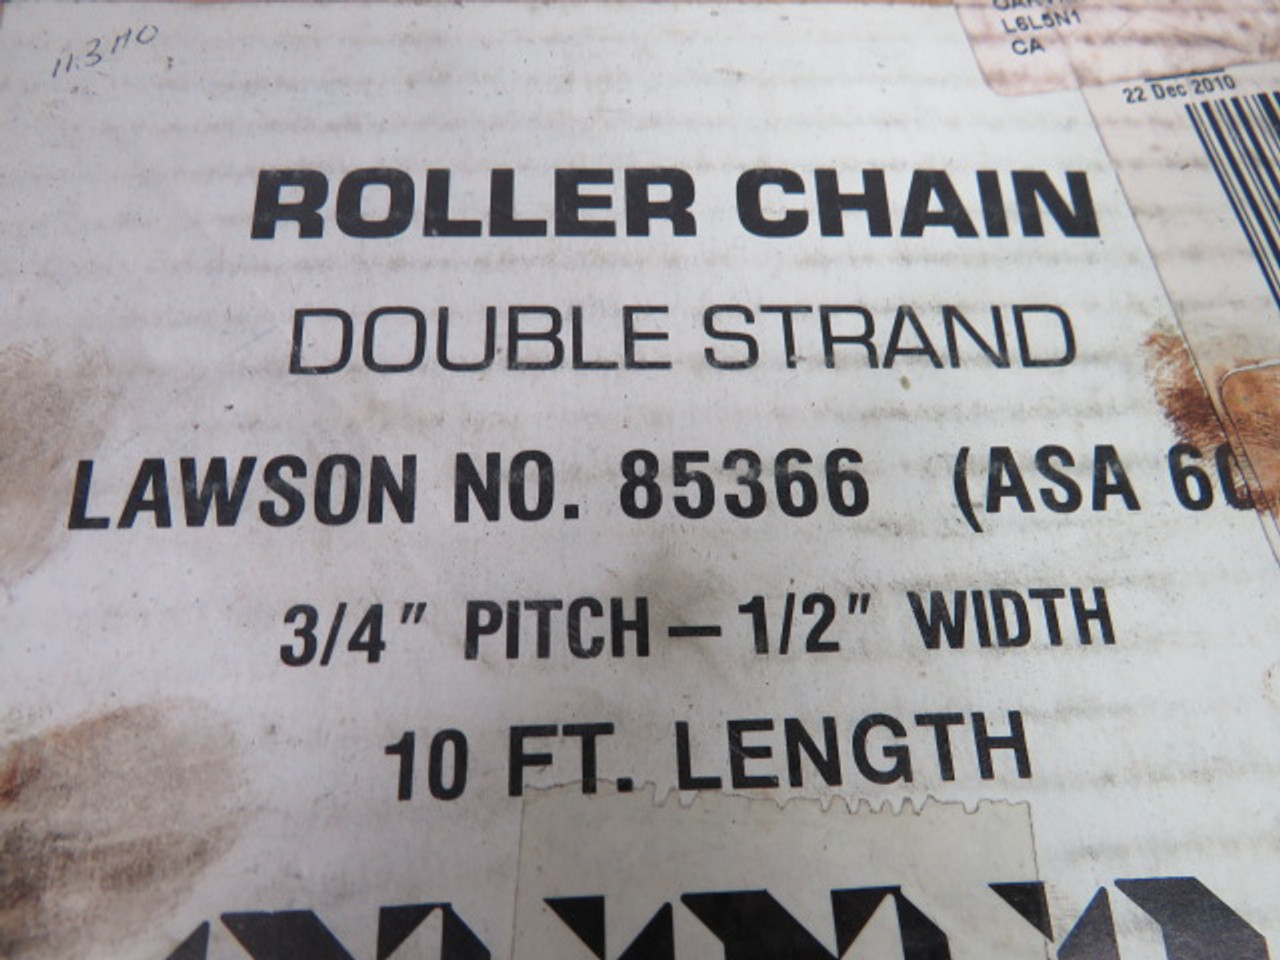 Lawson 85366 10' Long Roller Chain 3/4" Pitch 1/2" Width ! NEW !